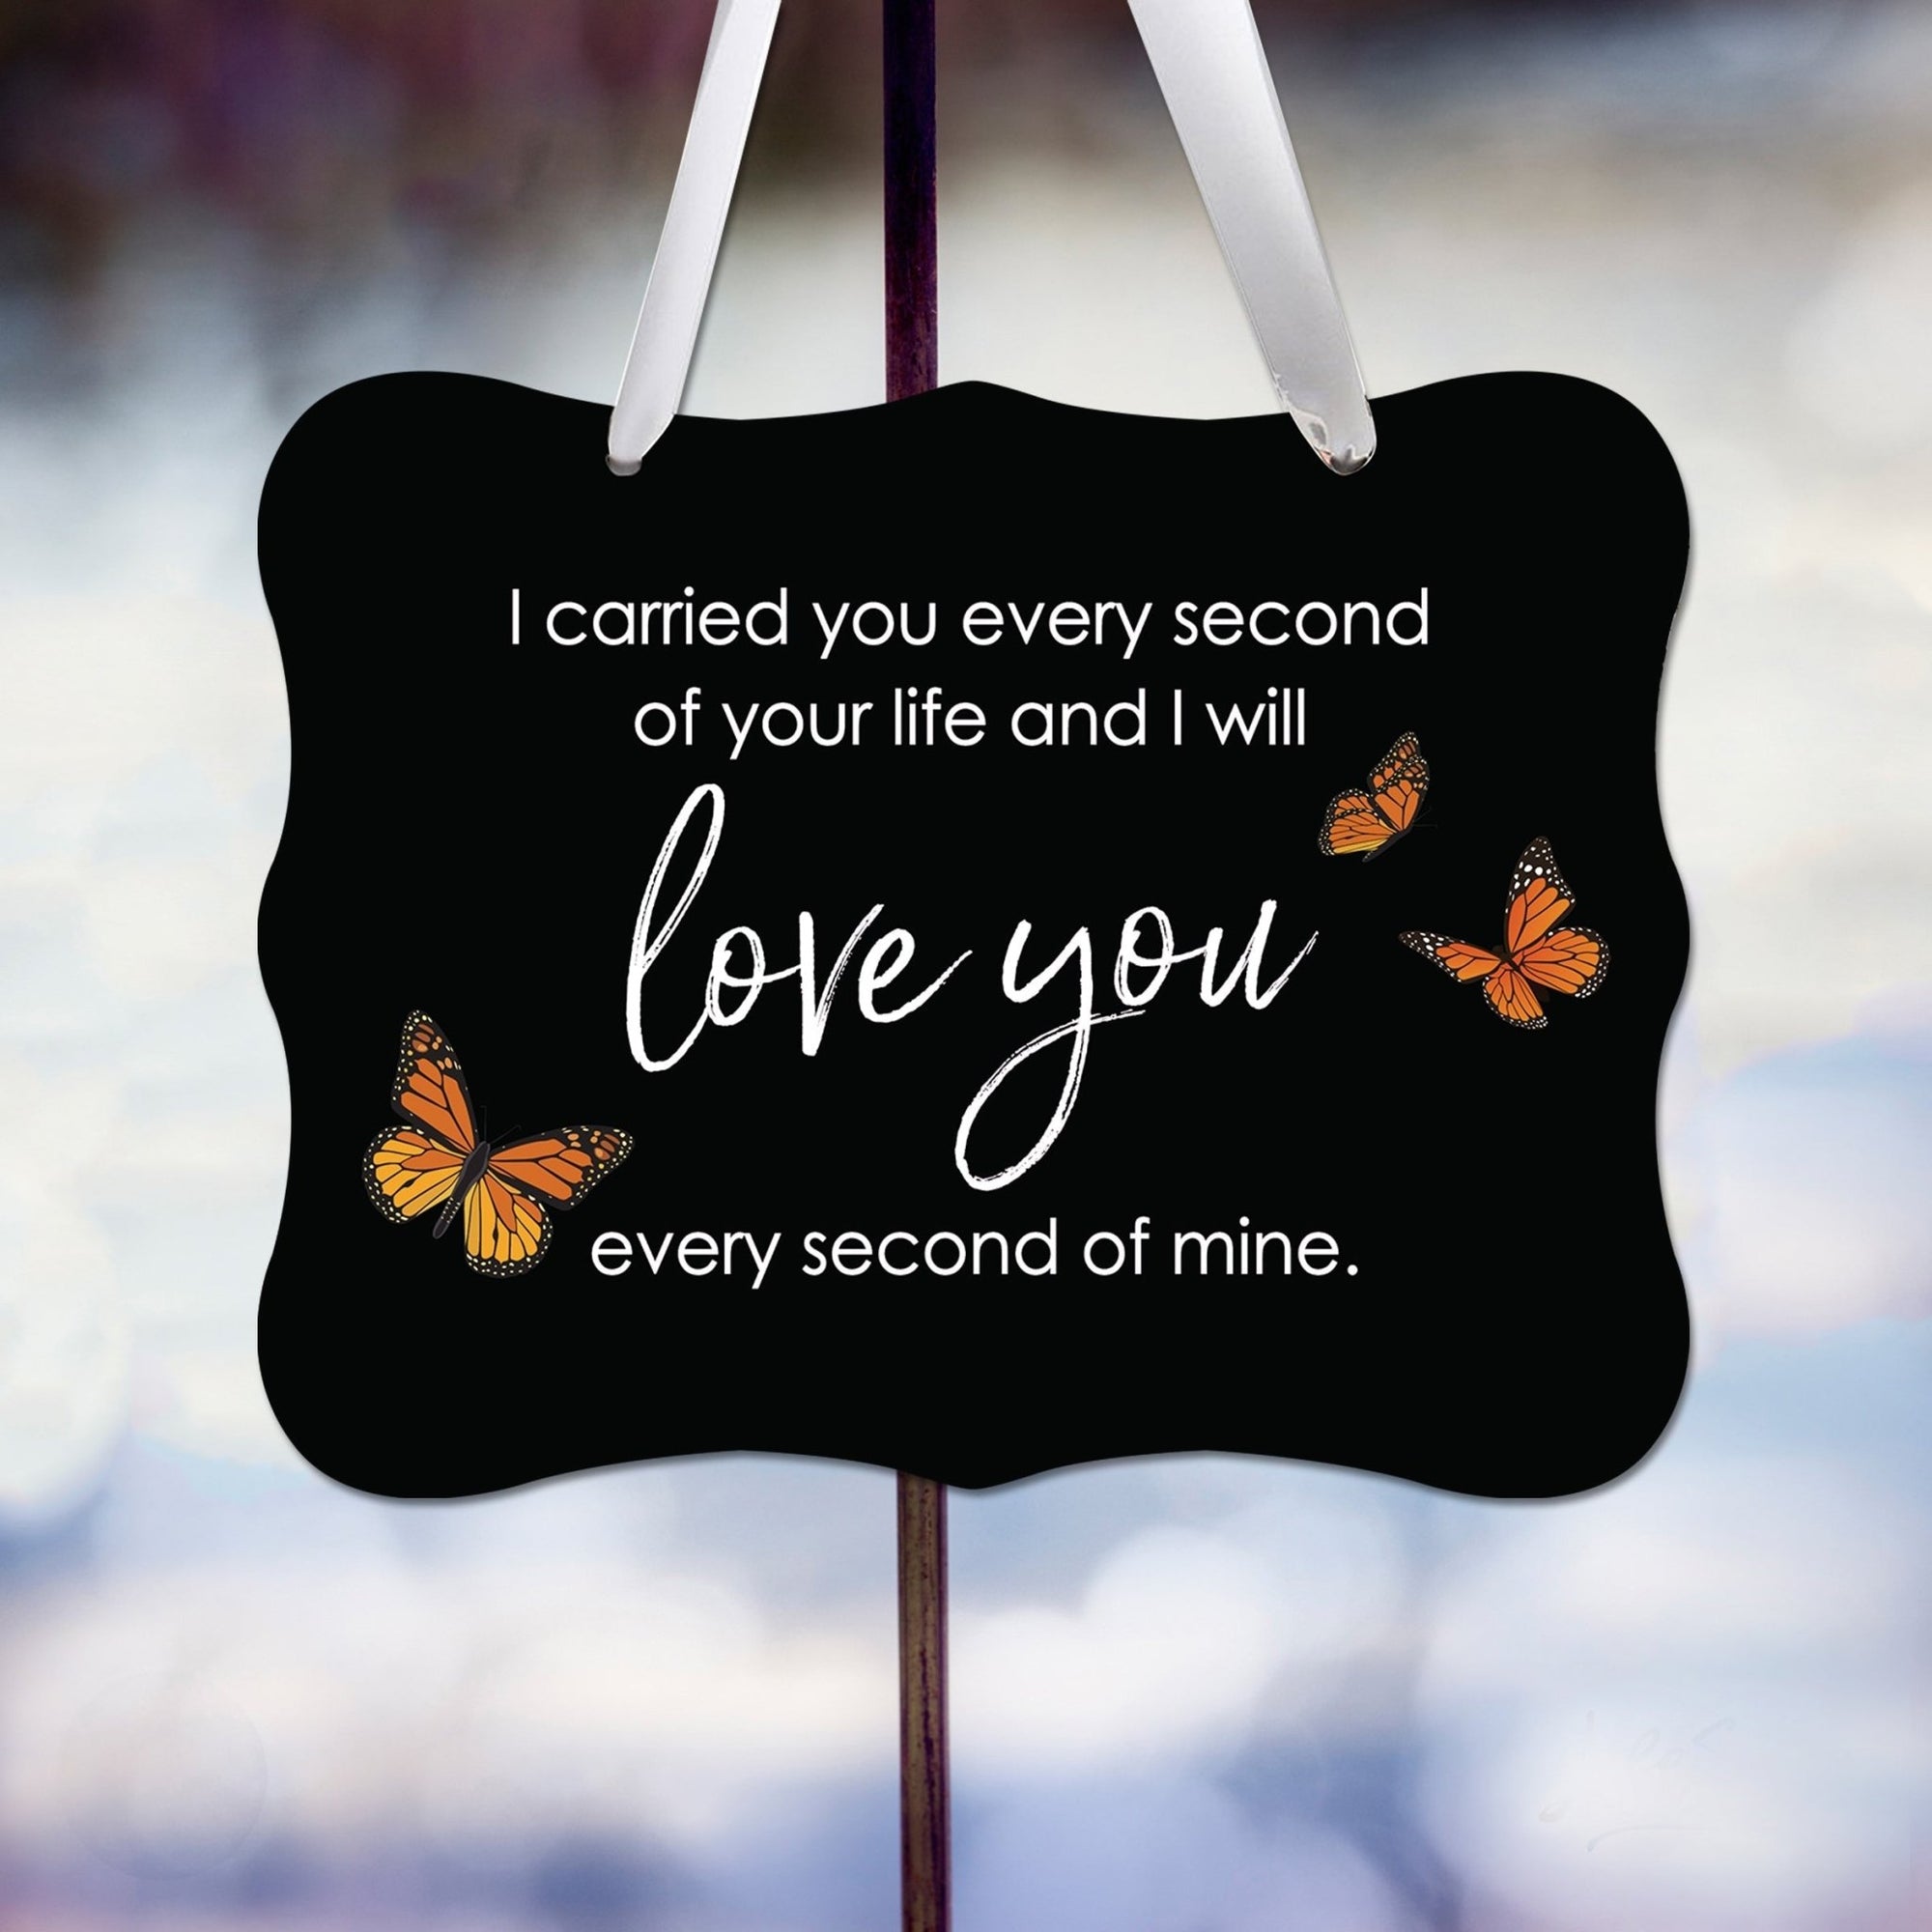 Memorial Hanging Ribbon Wall Decor for Loss of Loved One - I Carried You Everyday - LifeSong Milestones